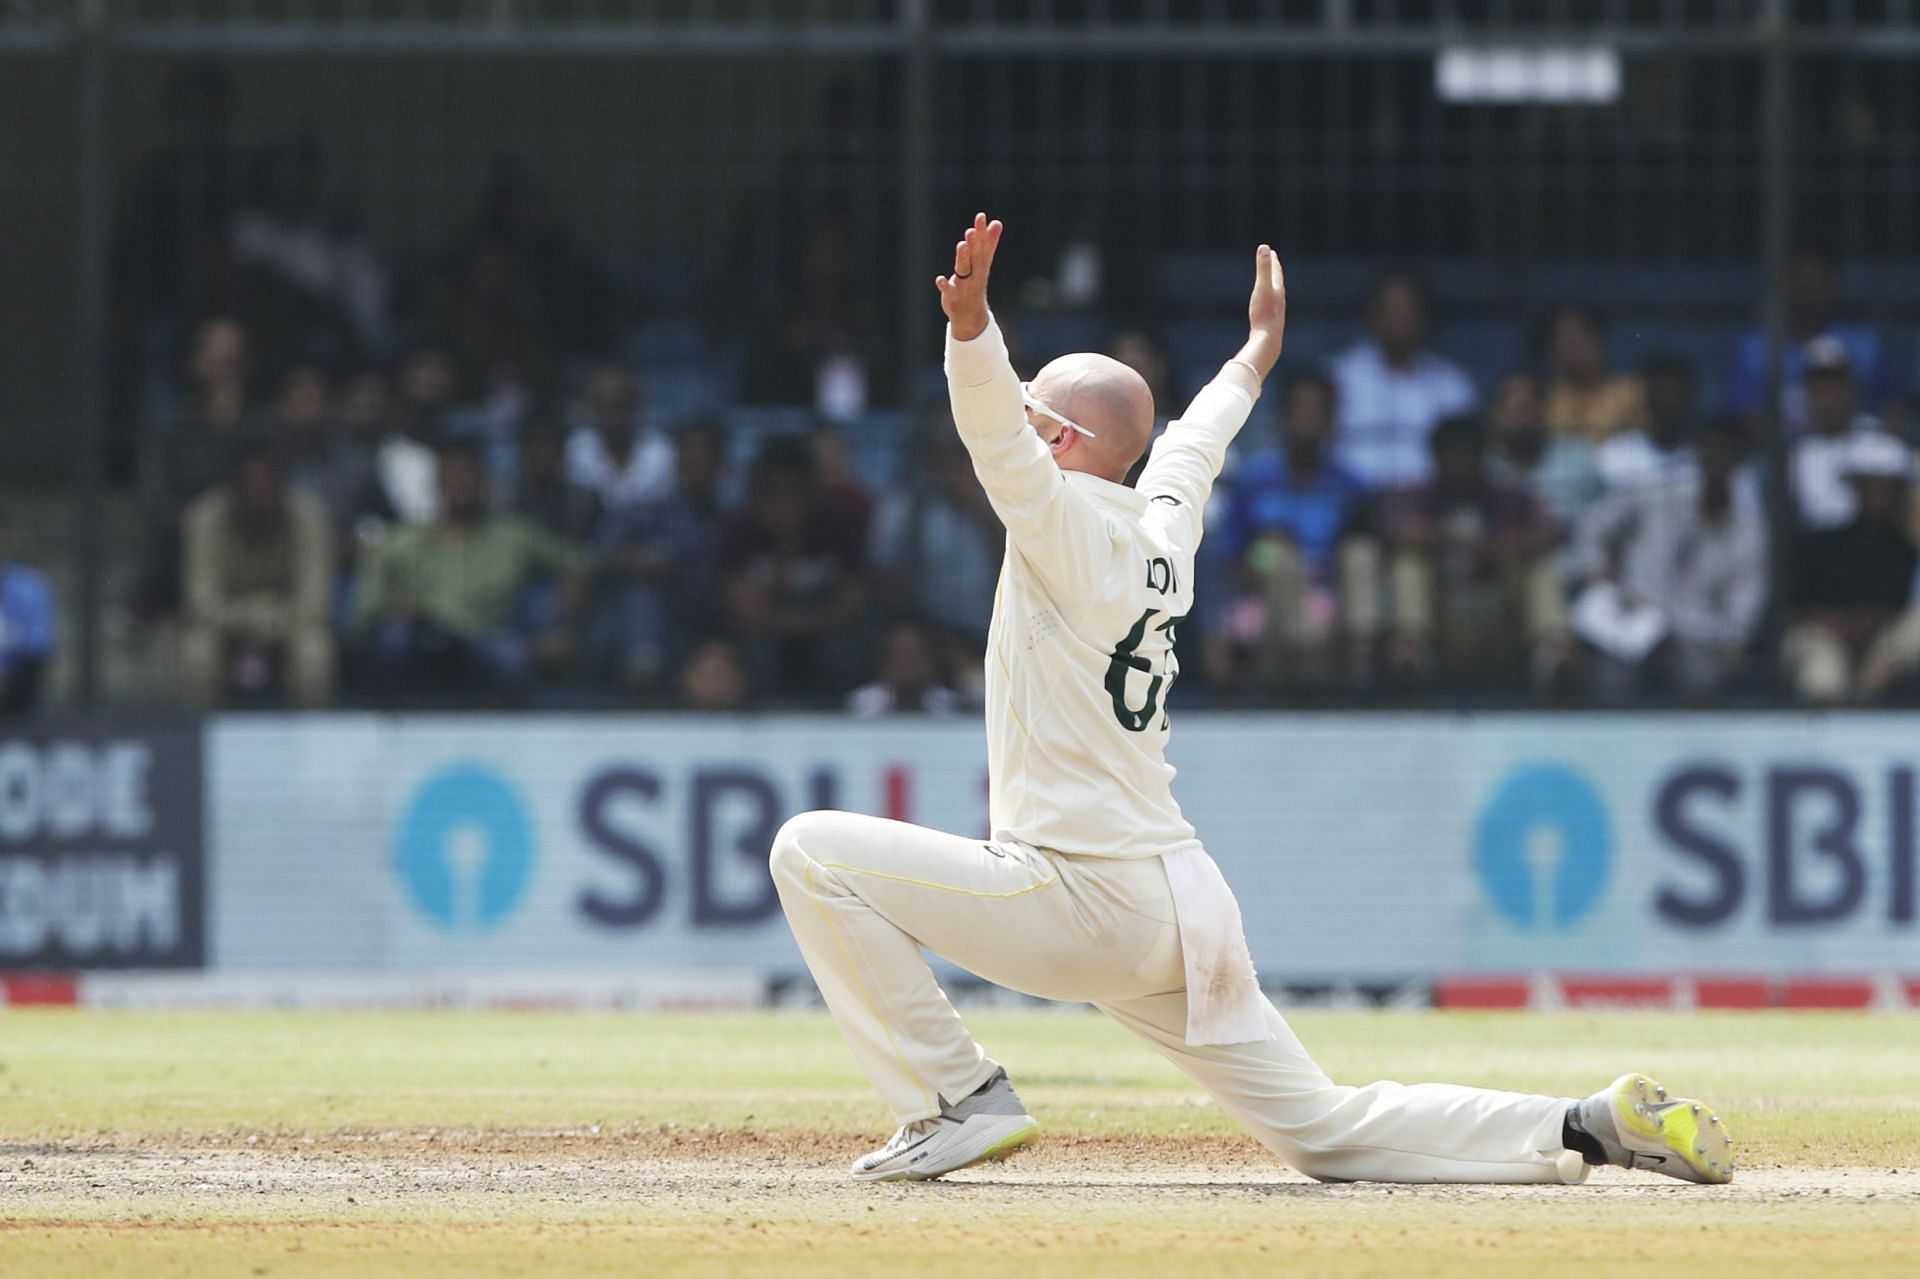 Nathan Lyon was the leading wicket-taker for Australia in the series. (Credits: Getty)